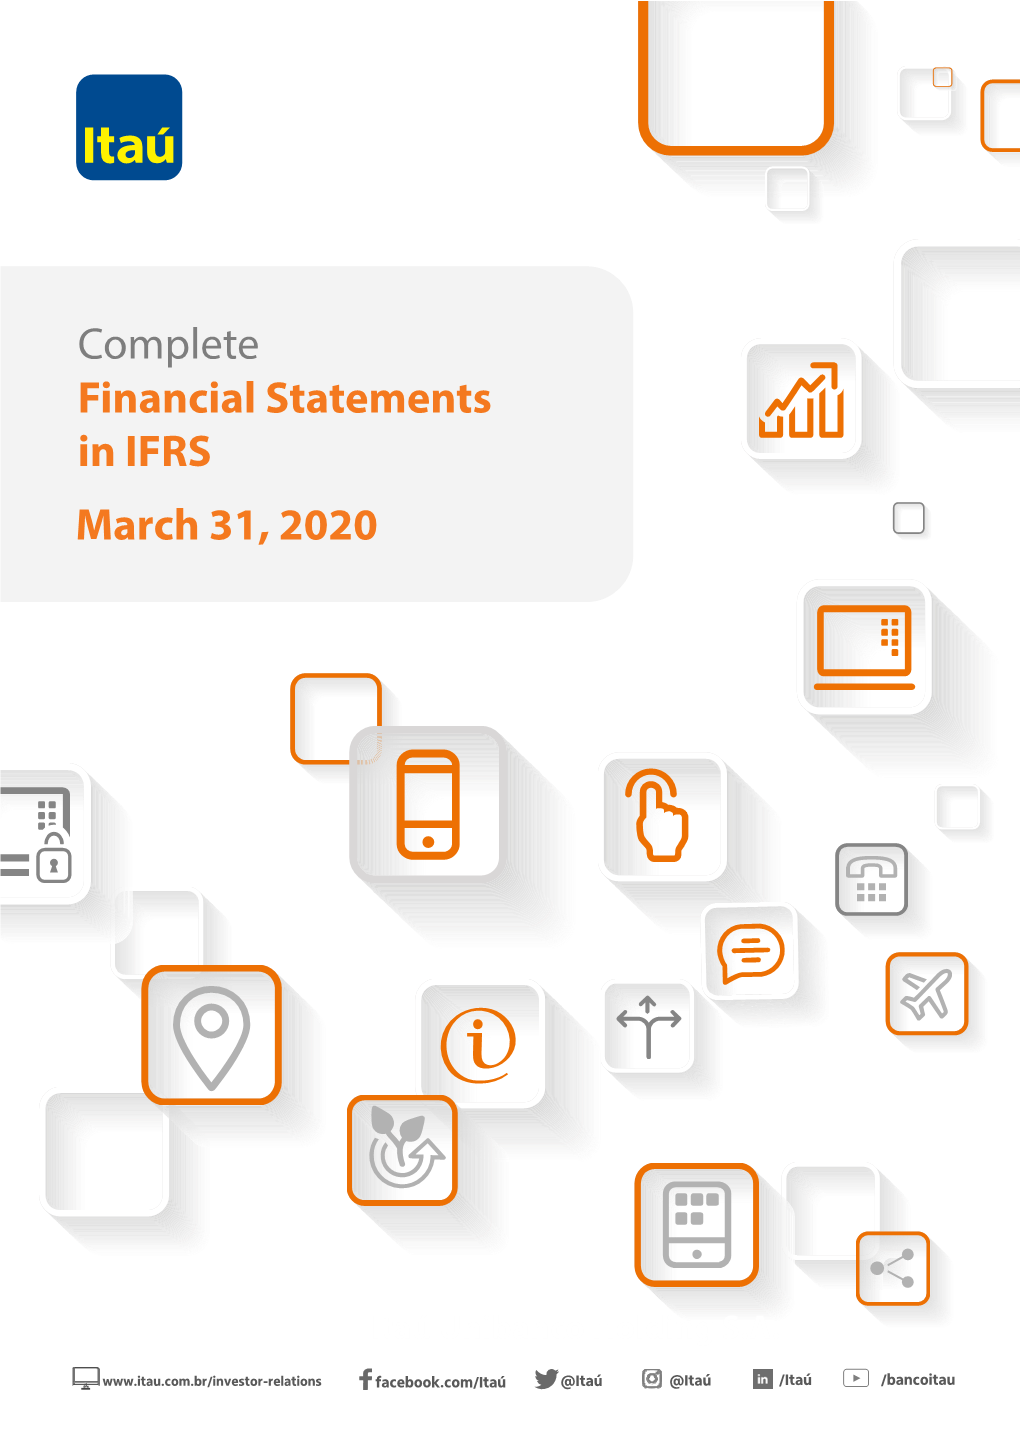 Complete Financial Statements in IFRS March 31, 2020